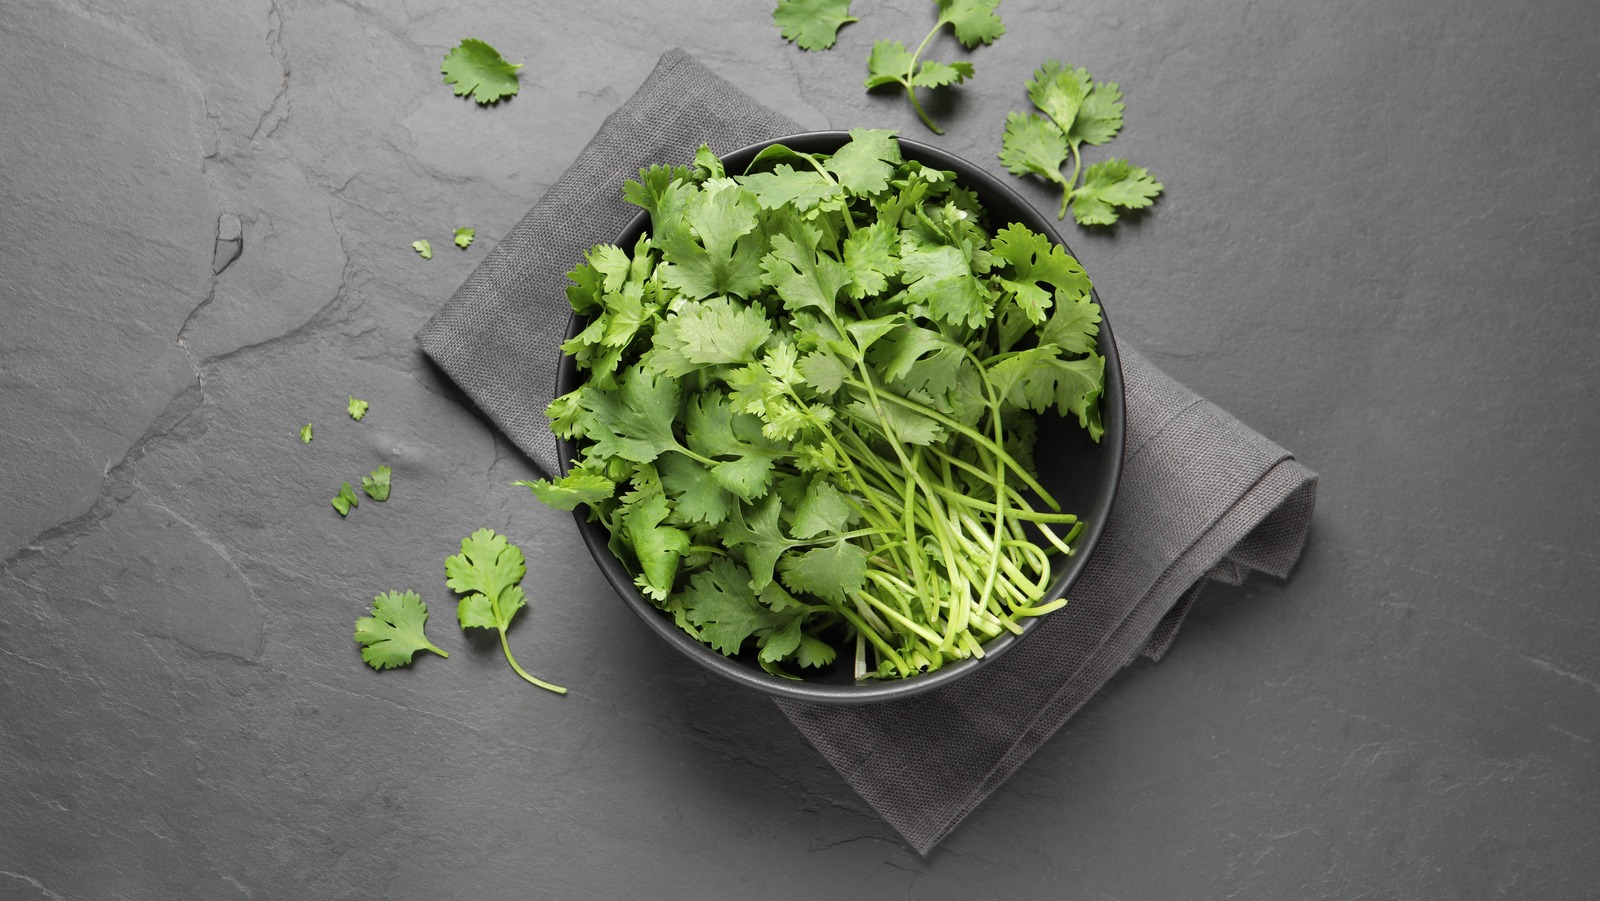 A pizza cutter works really well for cilantro or similar herbs